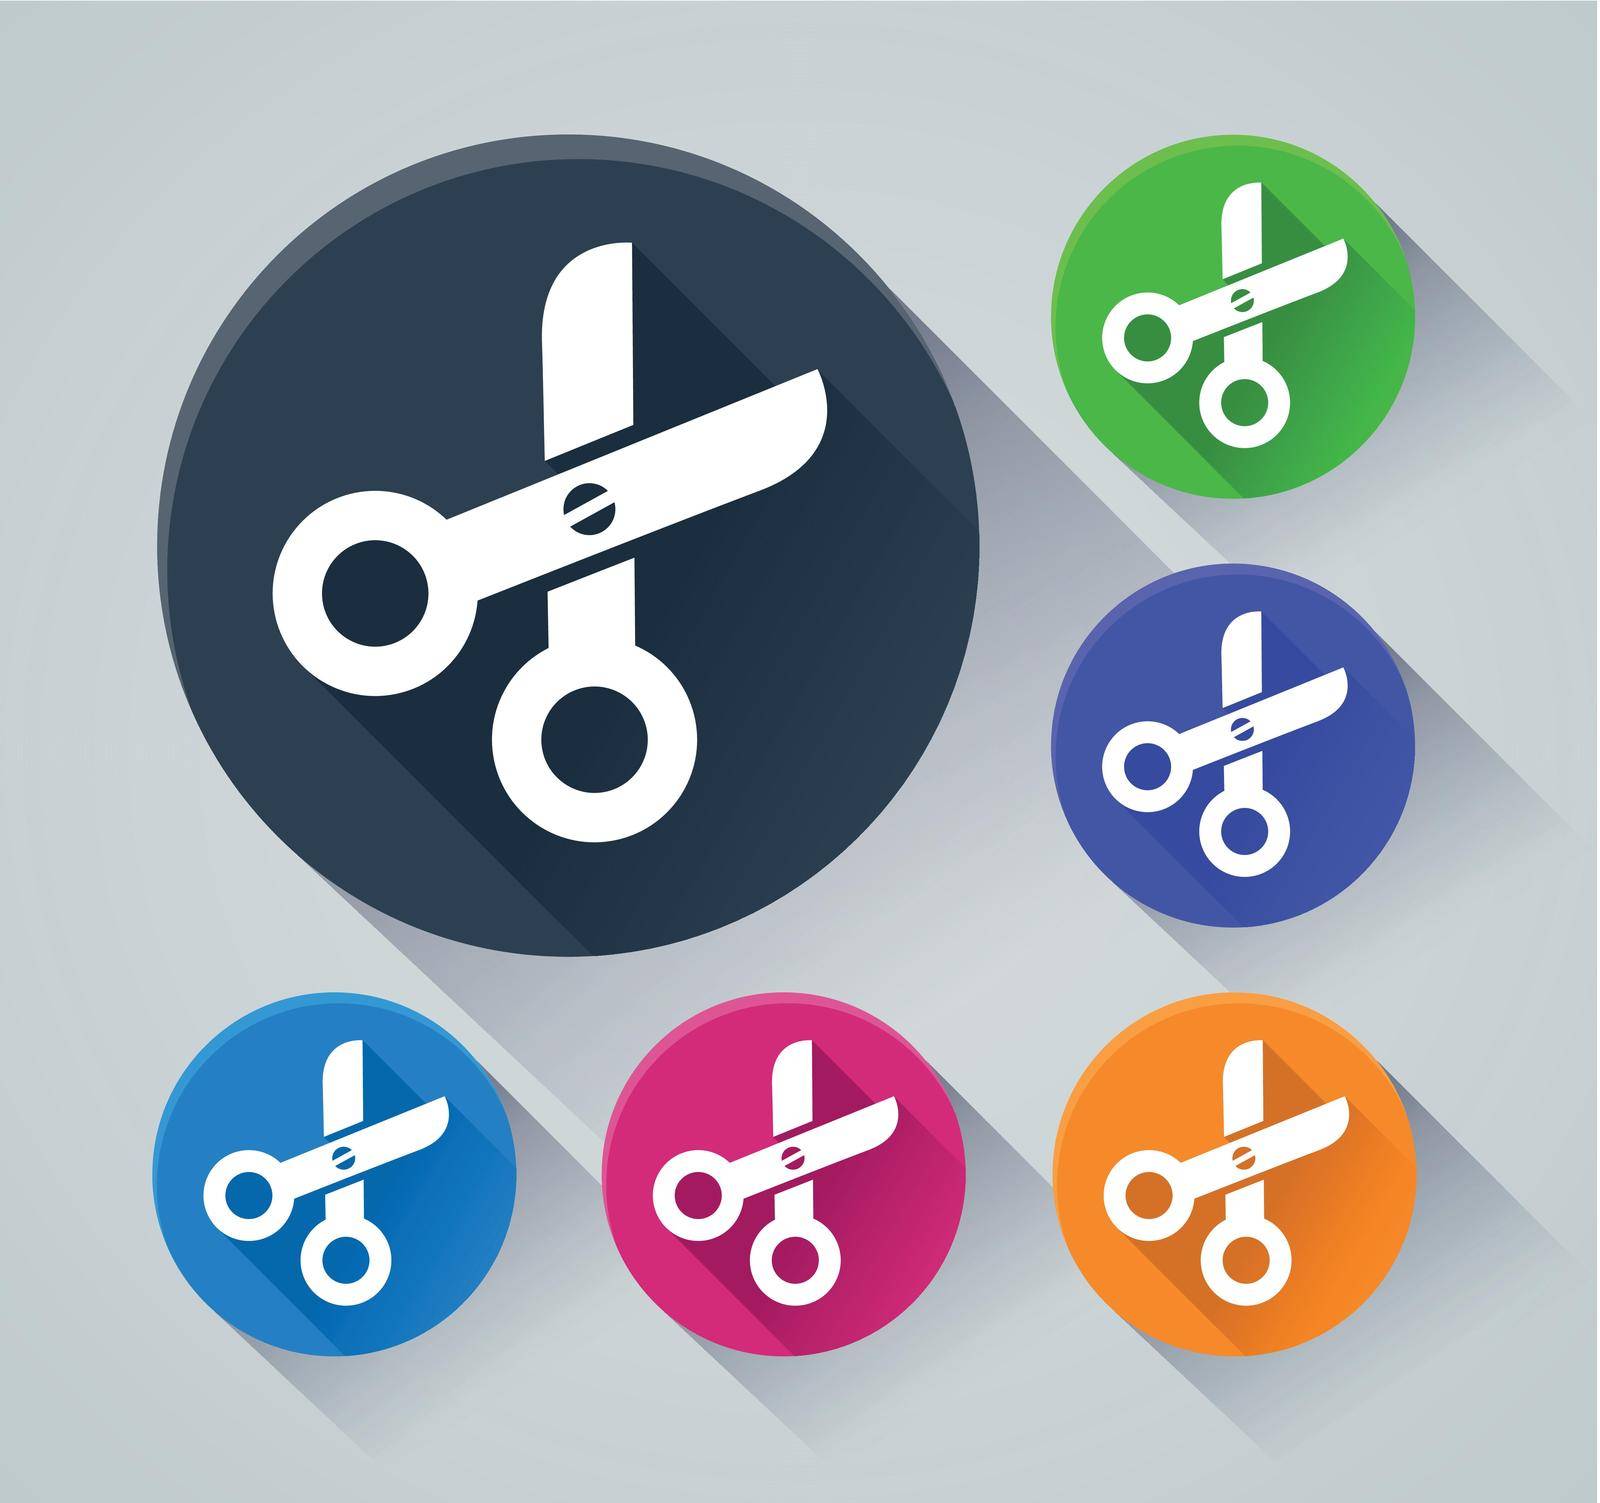 scissors circle icons with shadow by Francois_Poirier